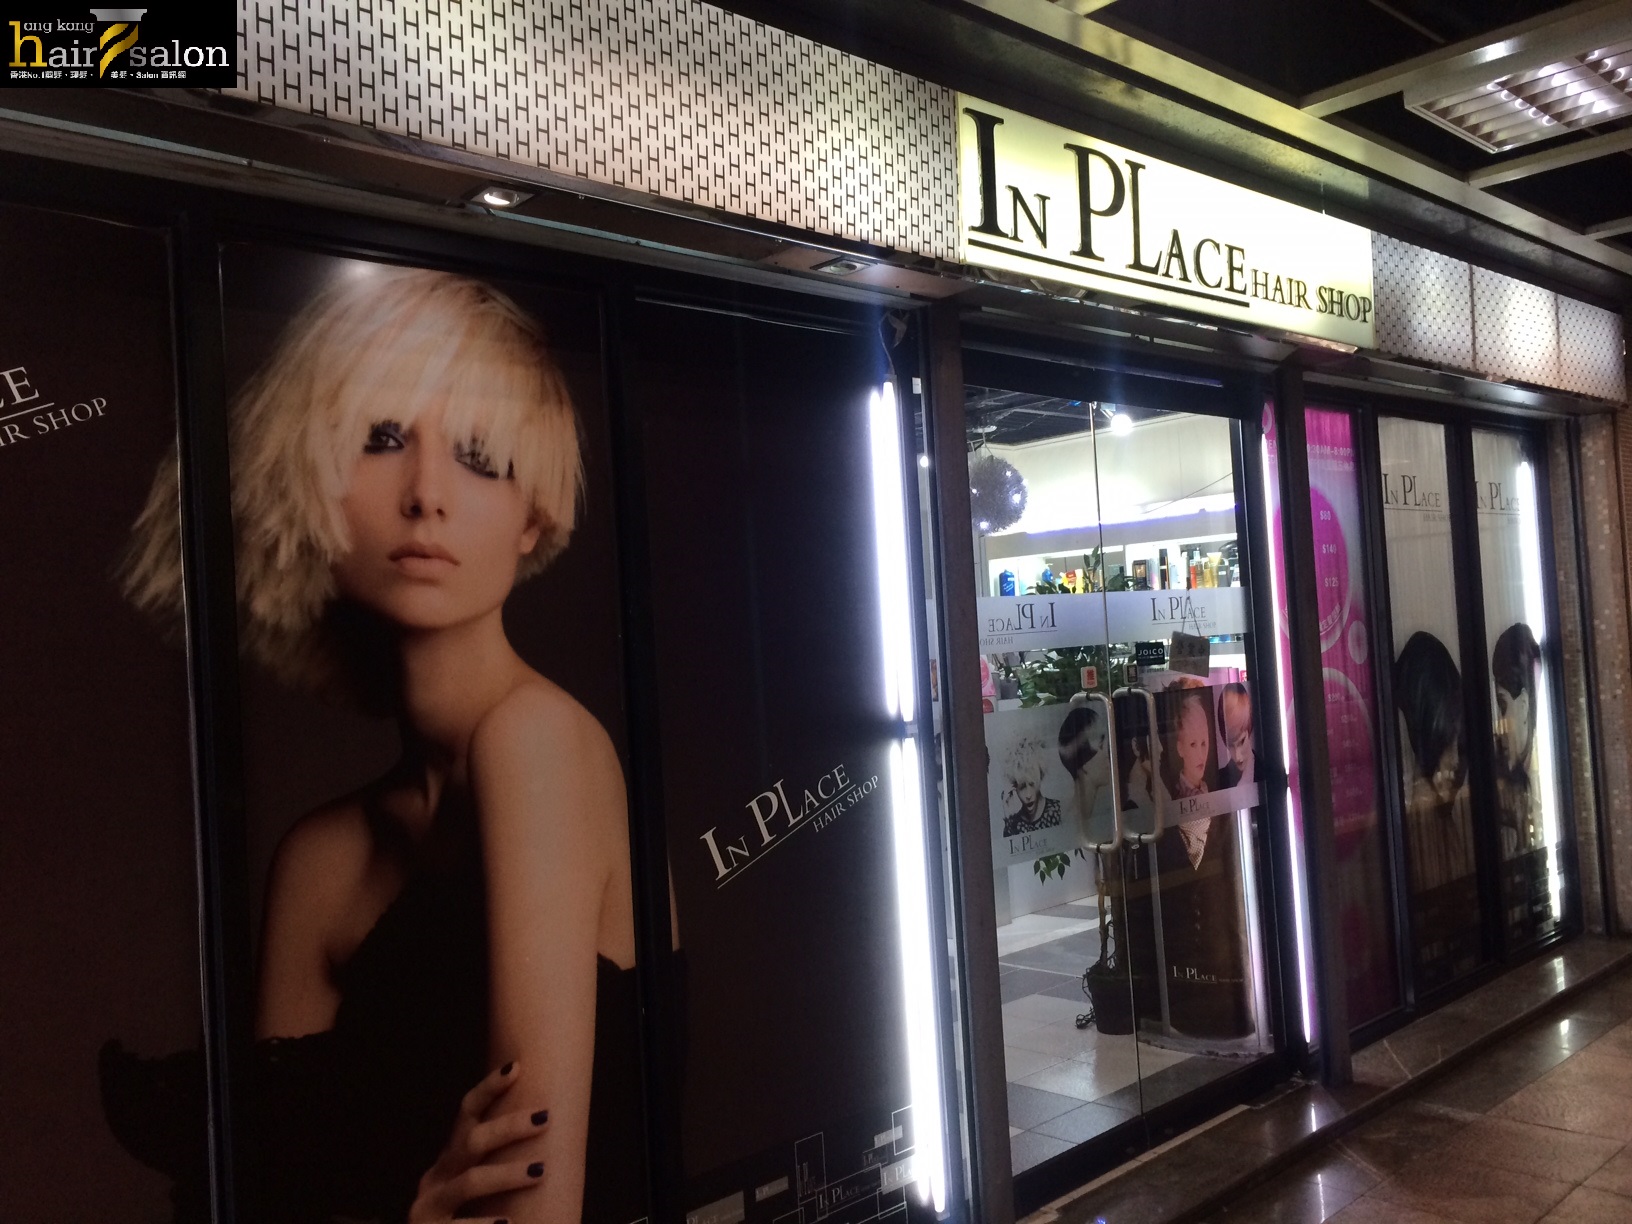 Hair Colouring: In Place Hair Shop 進念